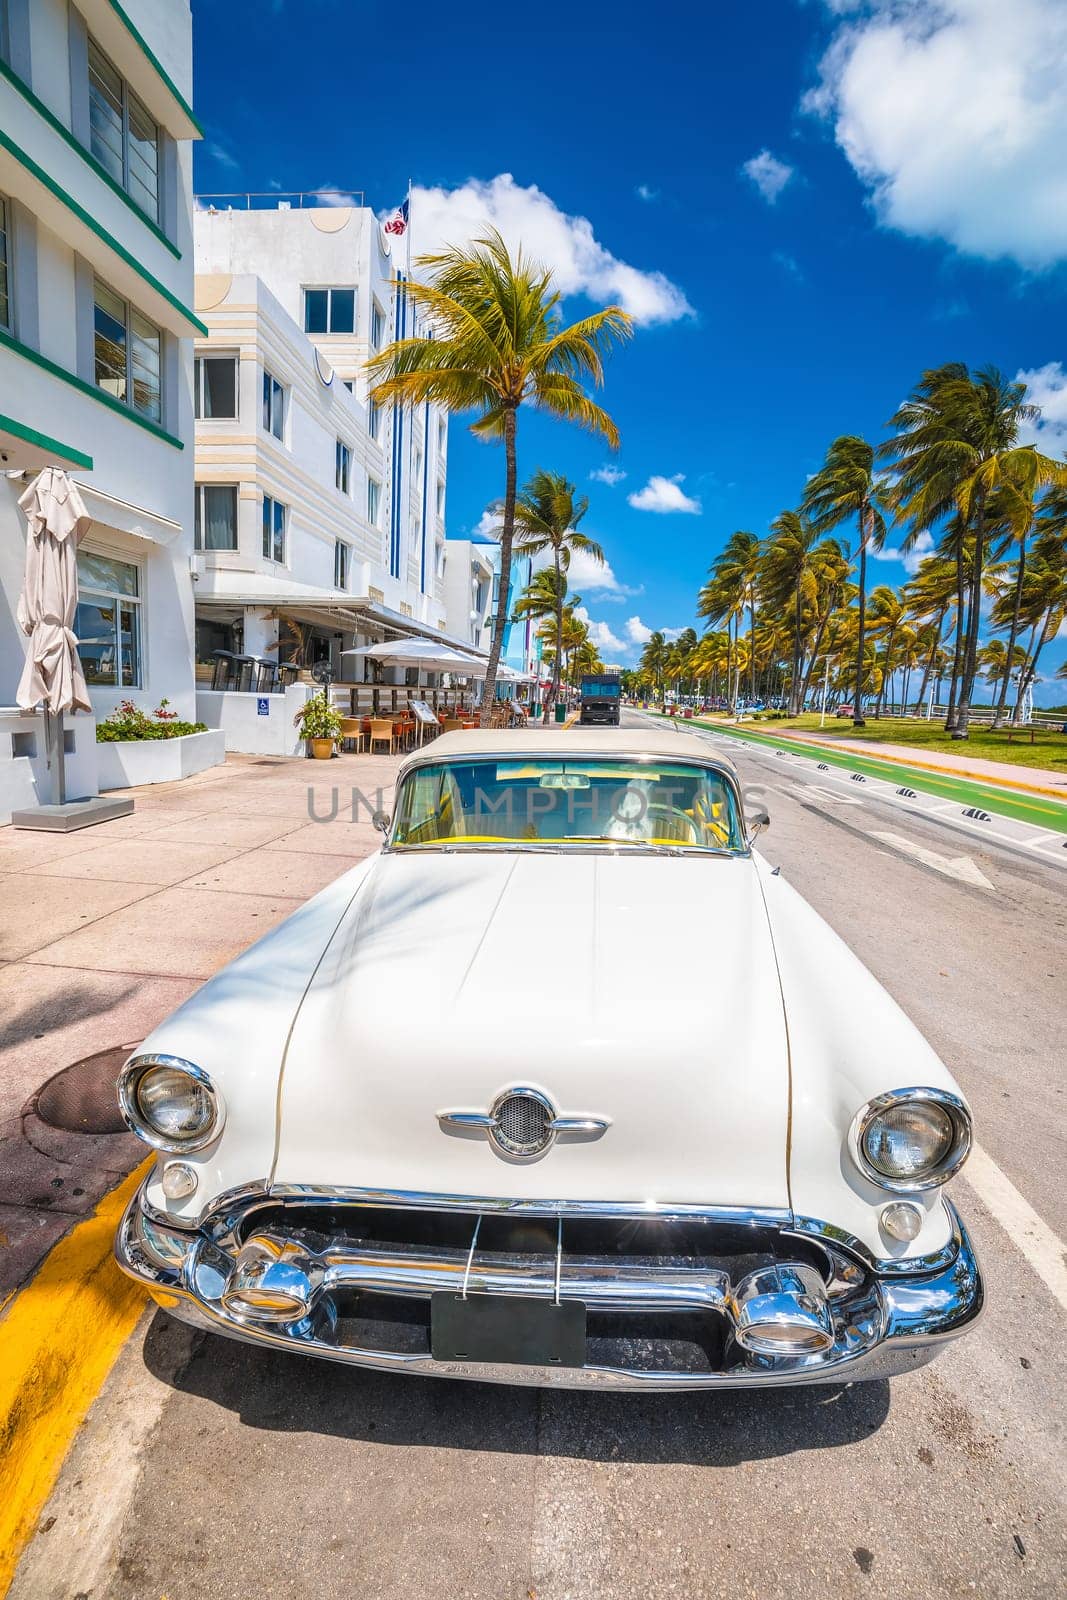 Miami South Beach Ocean Drive colorful Art Deco street architecture view, Florida state in United States of America